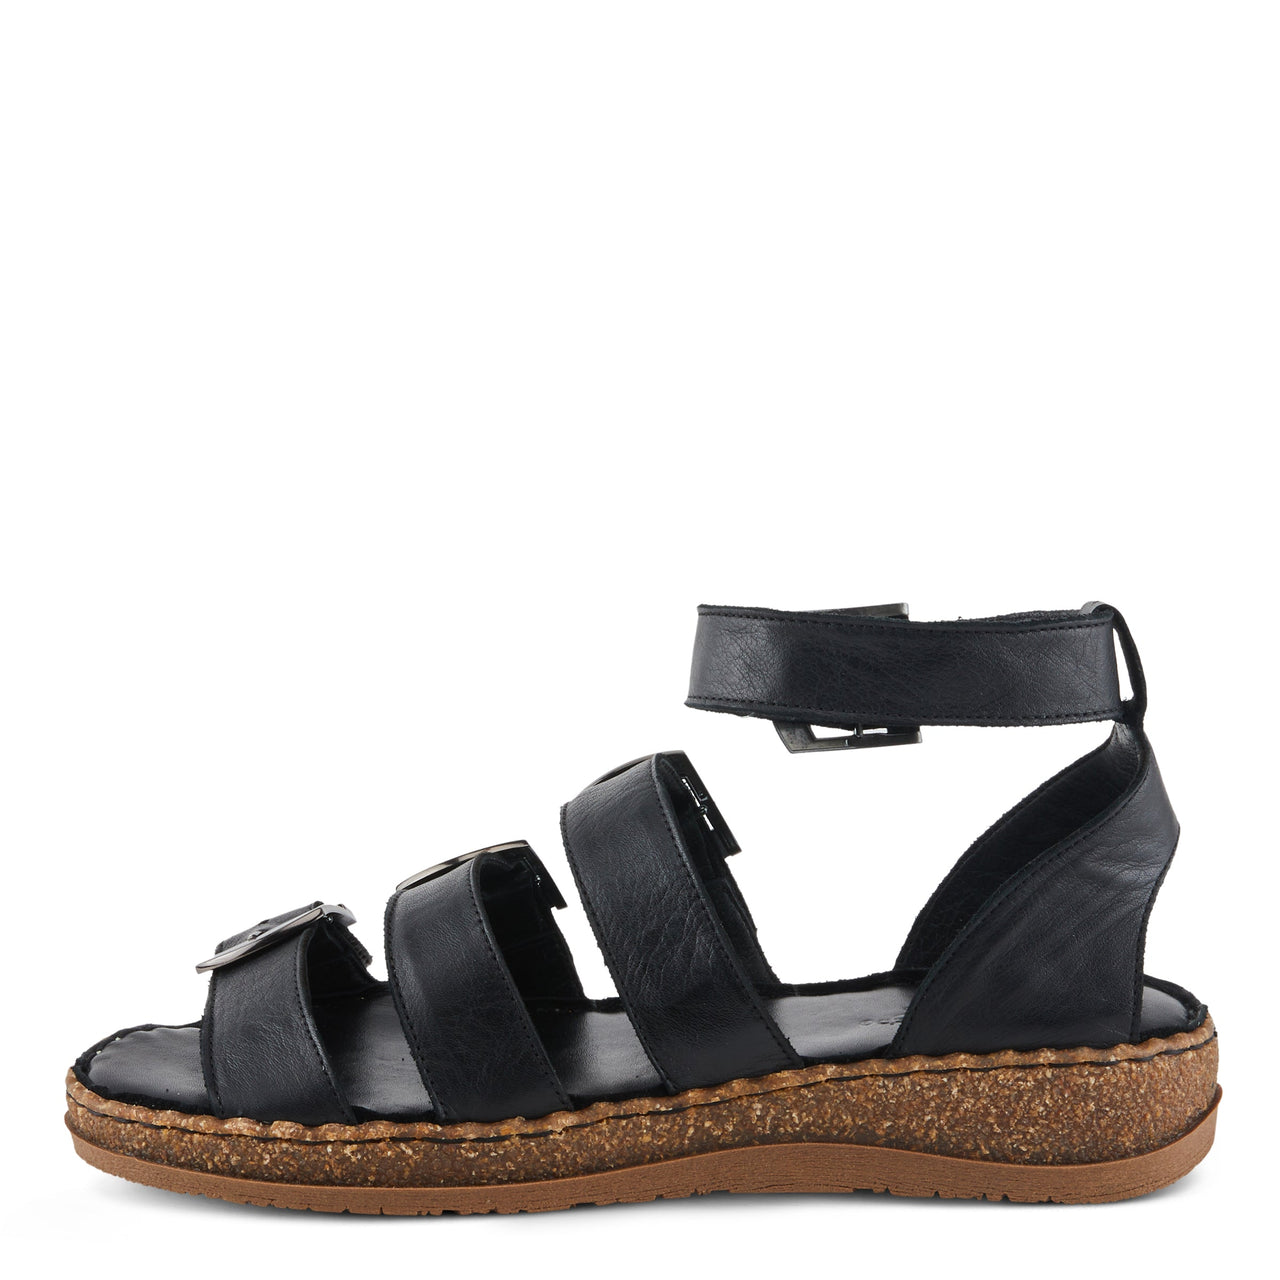 Women's Spring Step Alexcia Sandals in Black Leather with Floral Embellishments and Adjustable Straps for Comfortable and Stylish Summer Wear